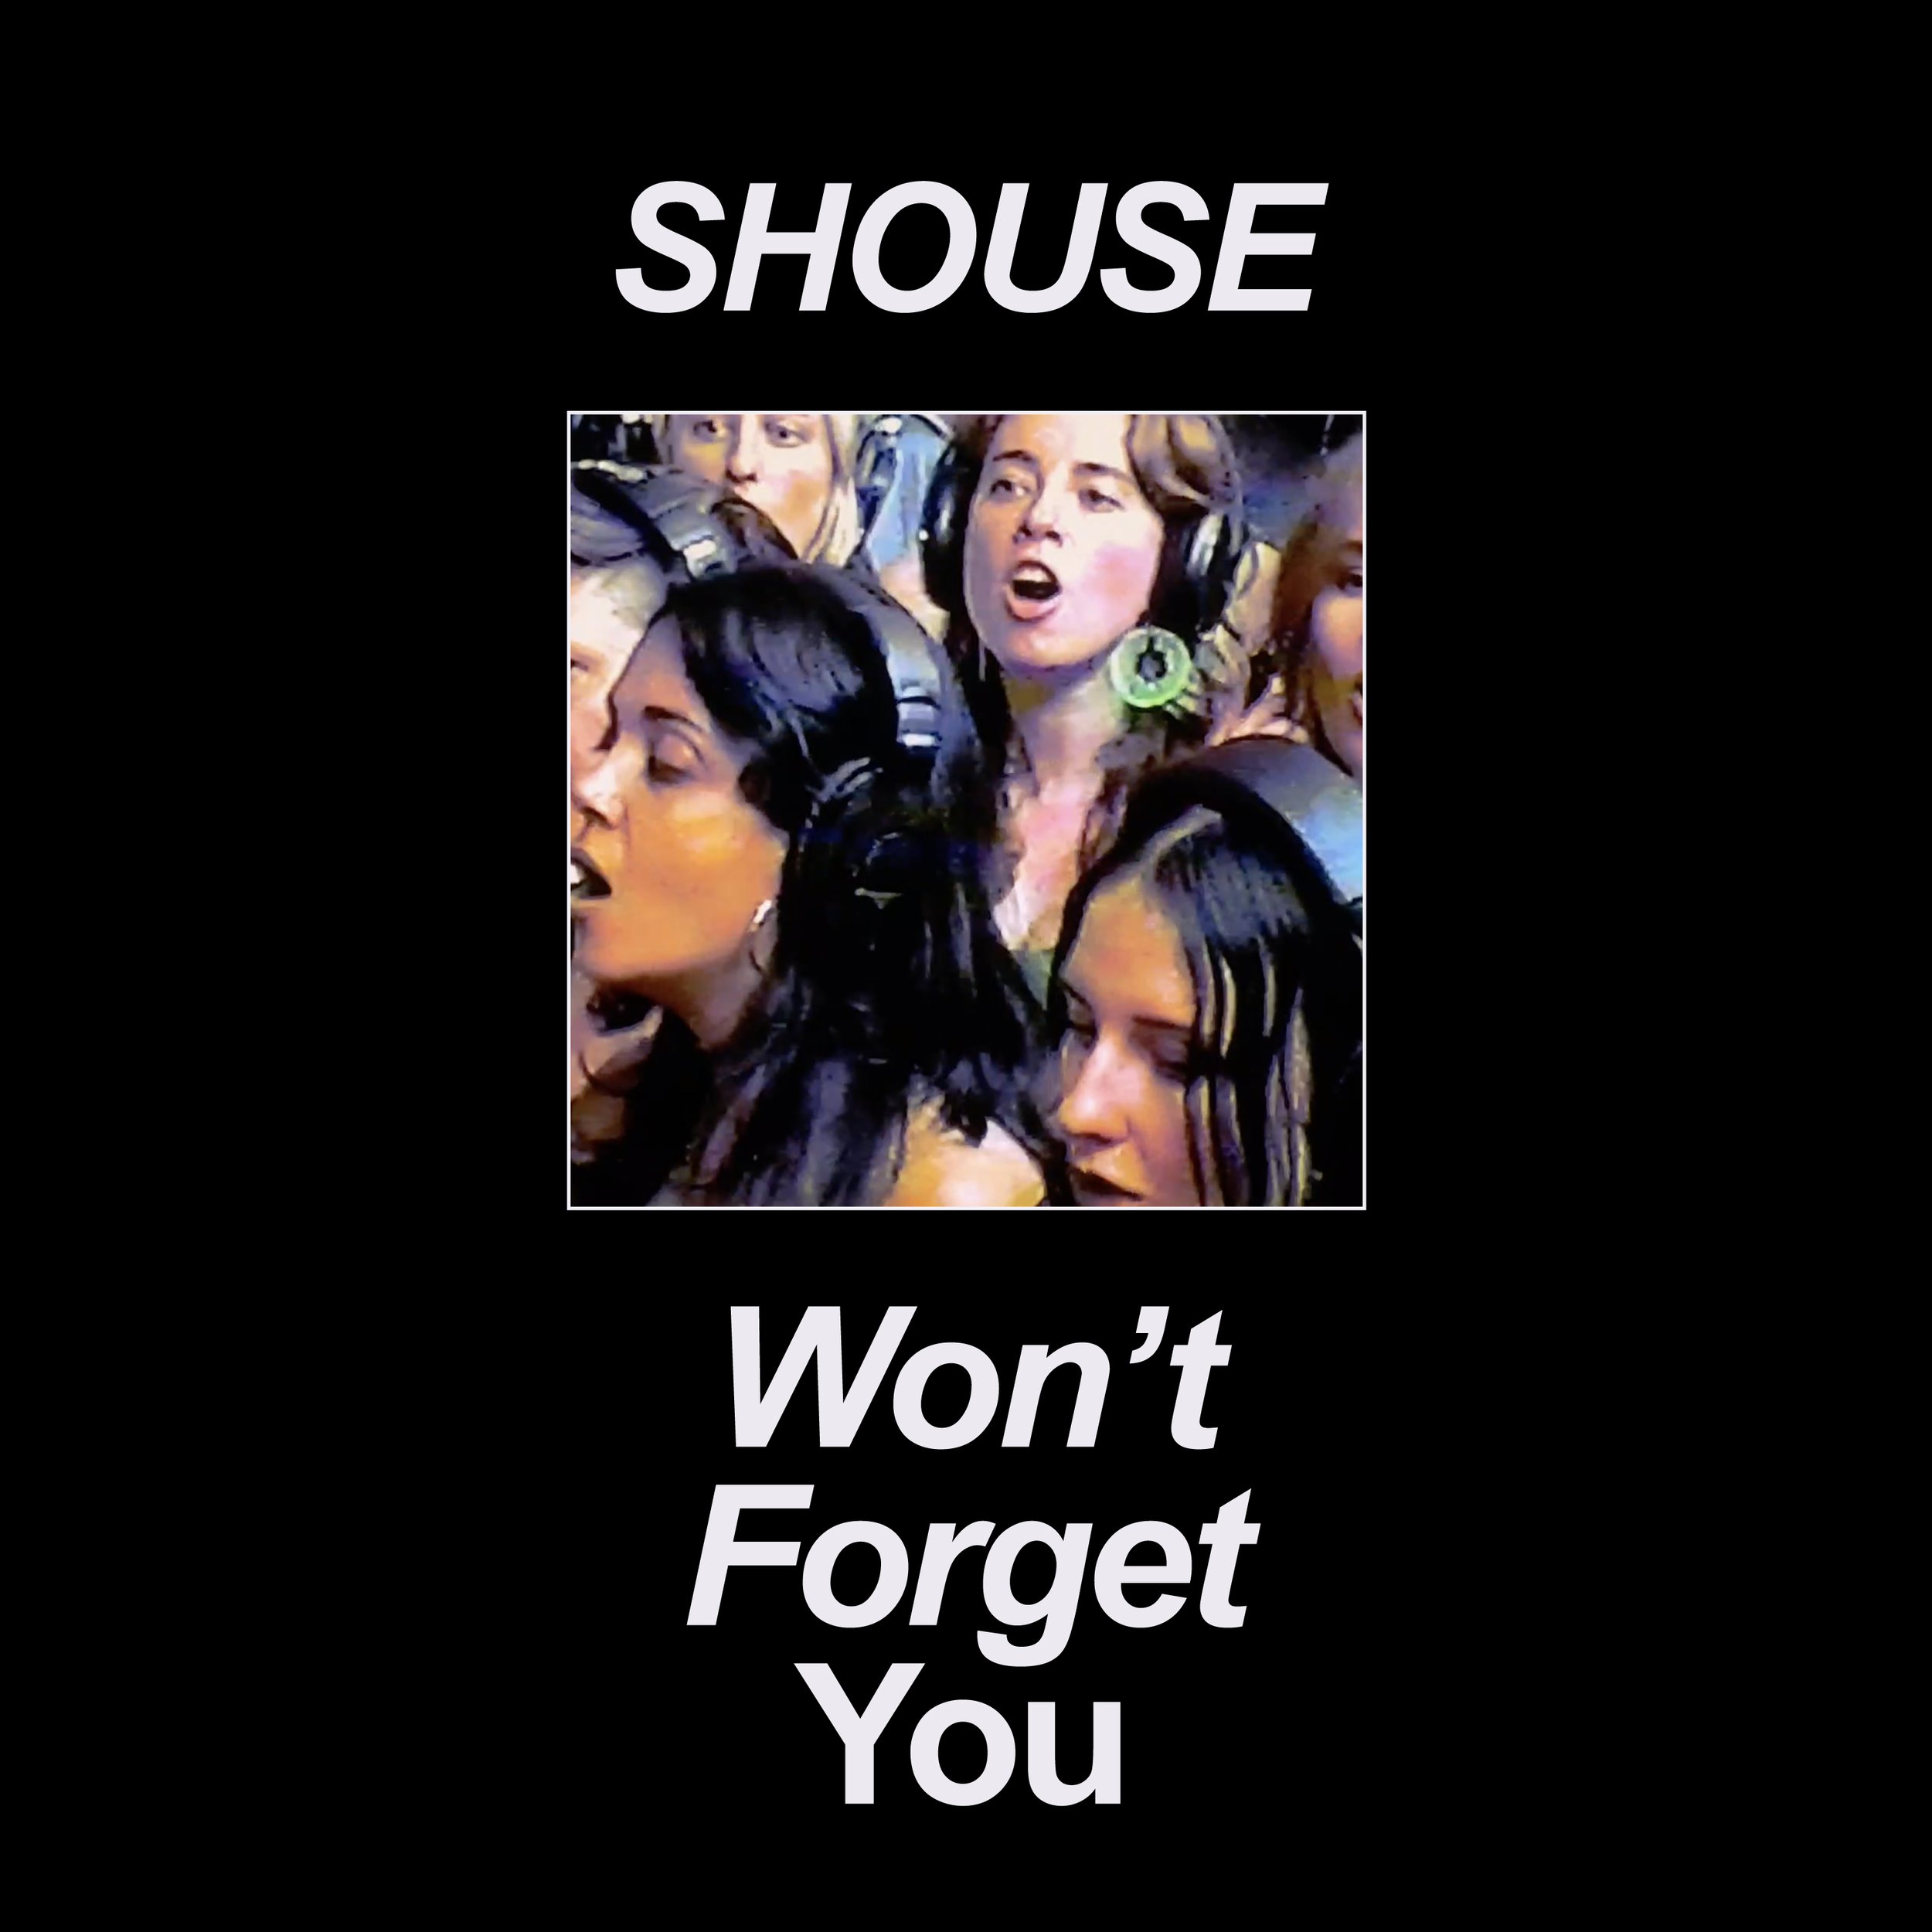 Shouse-Won't-Forget-You-Sleeve.jpg